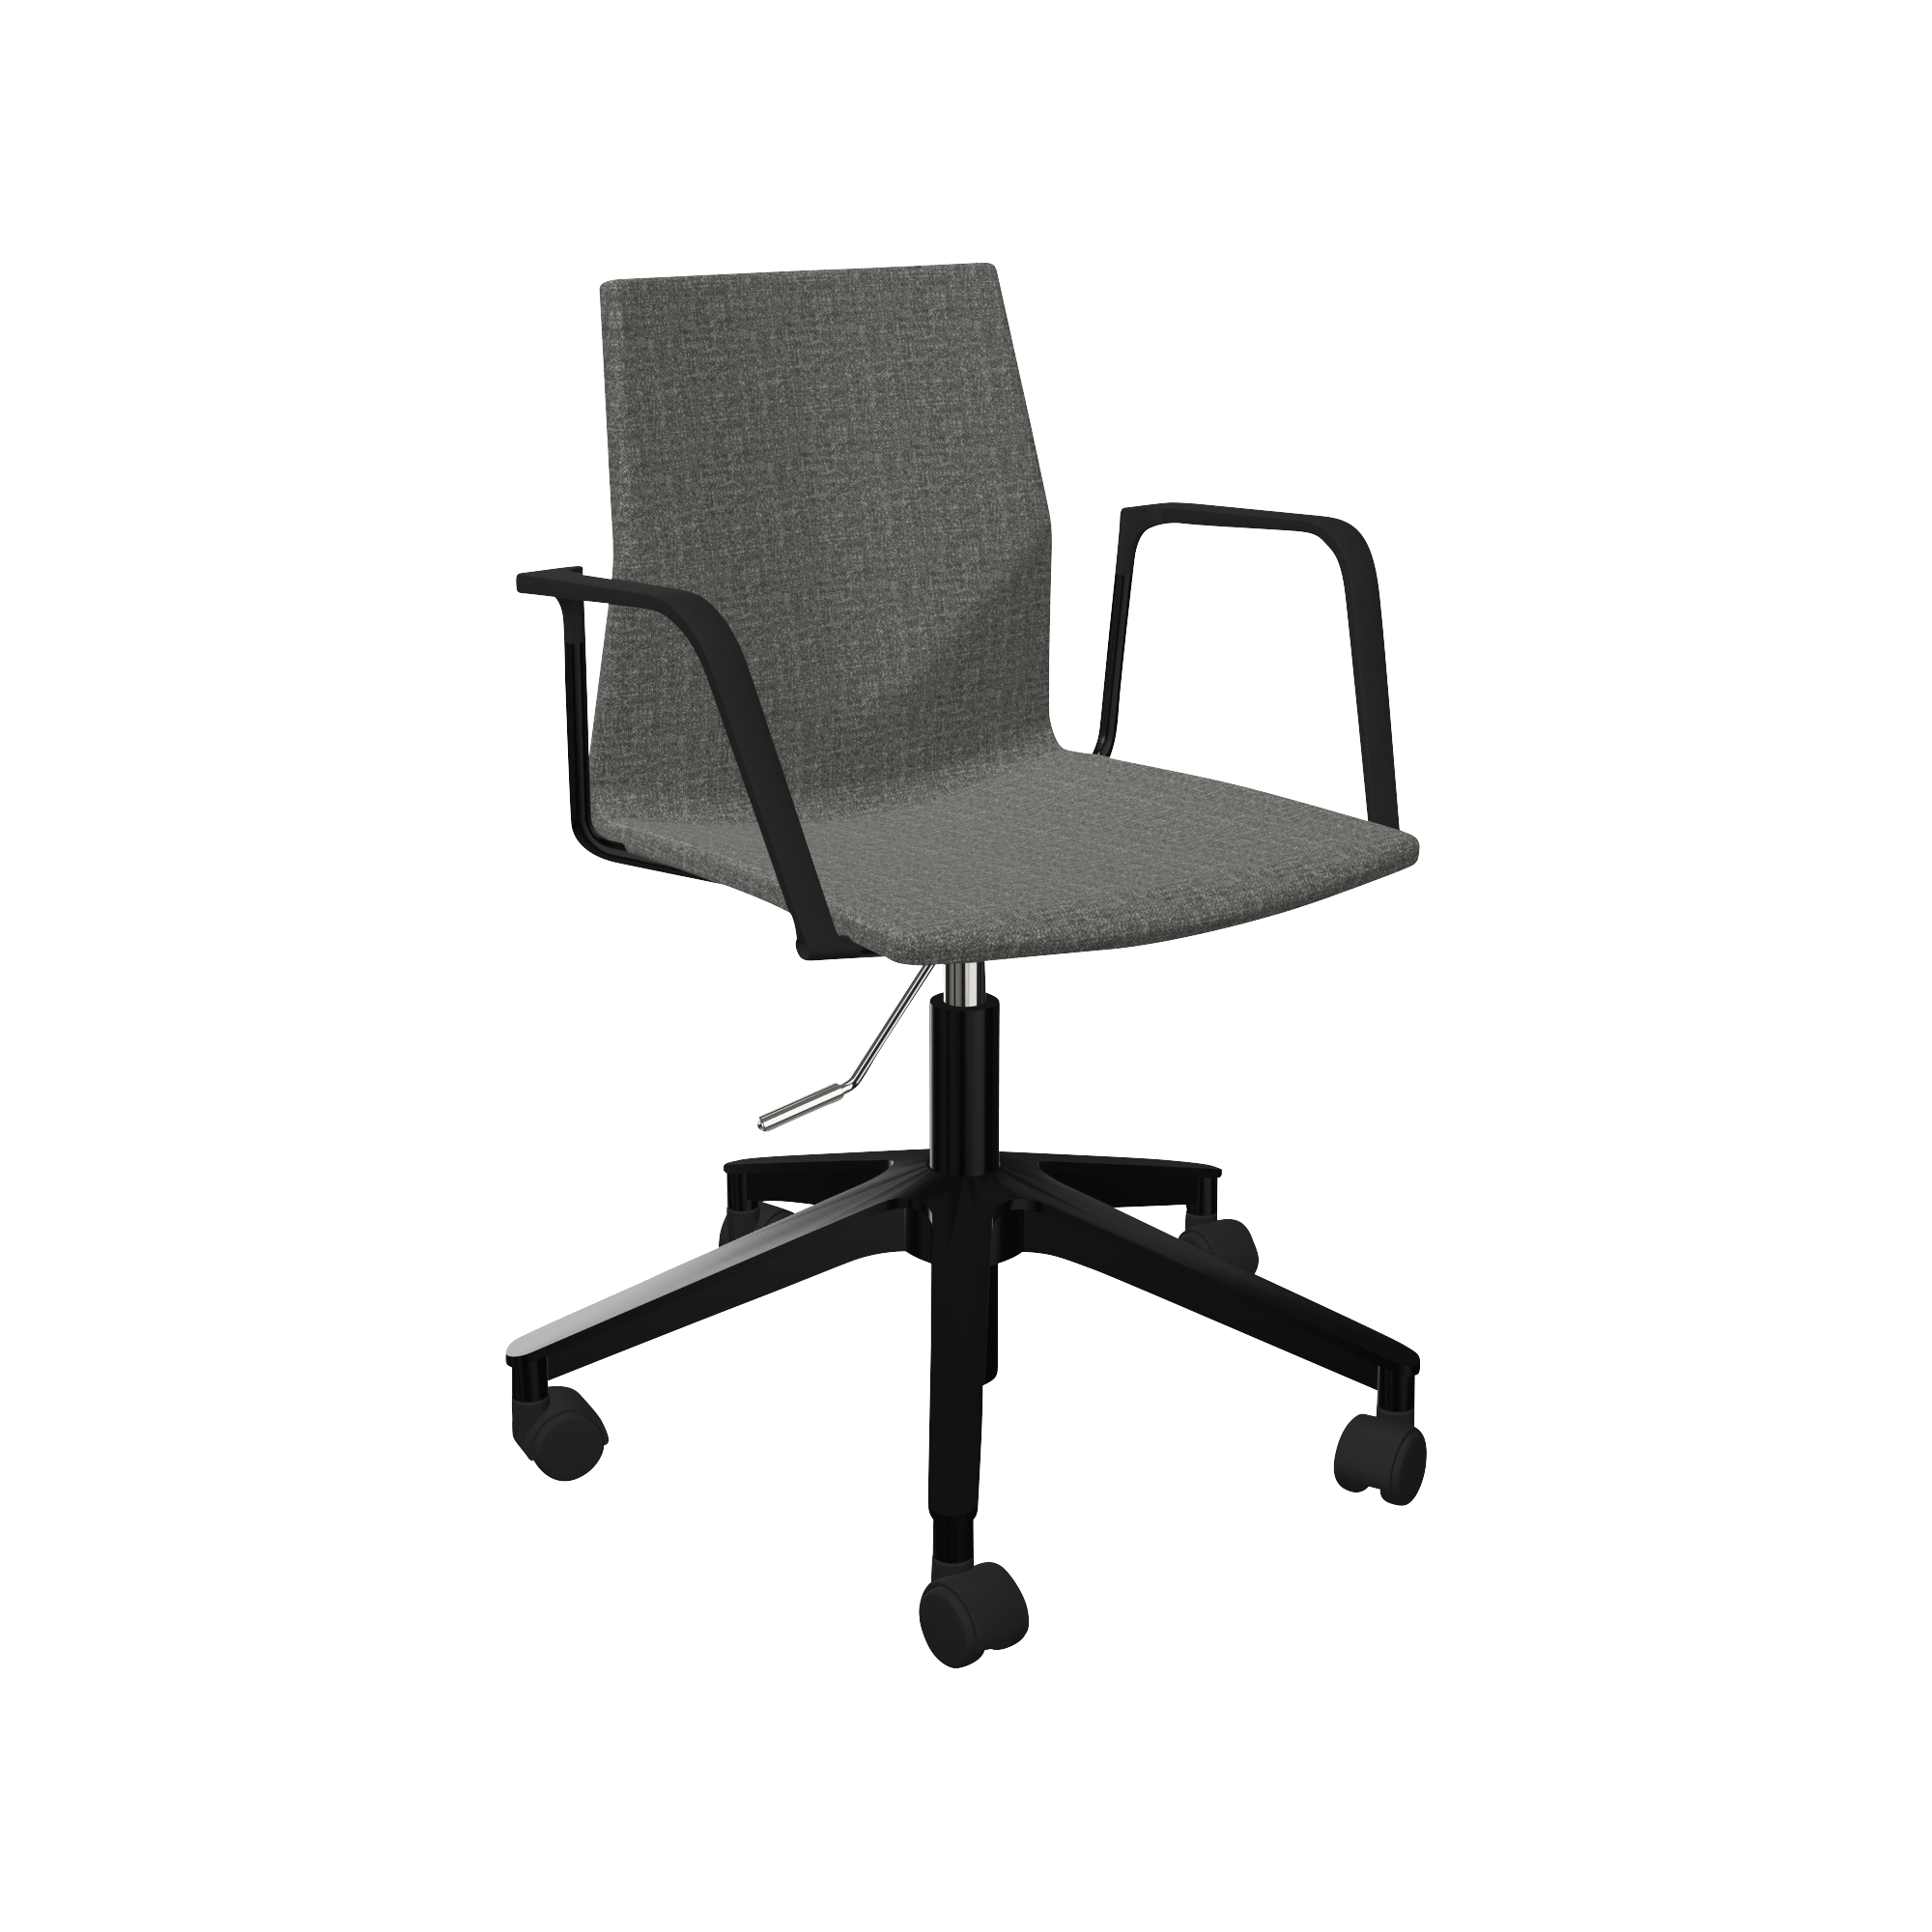 An office chair with a black frame and a grey upholstered seat.